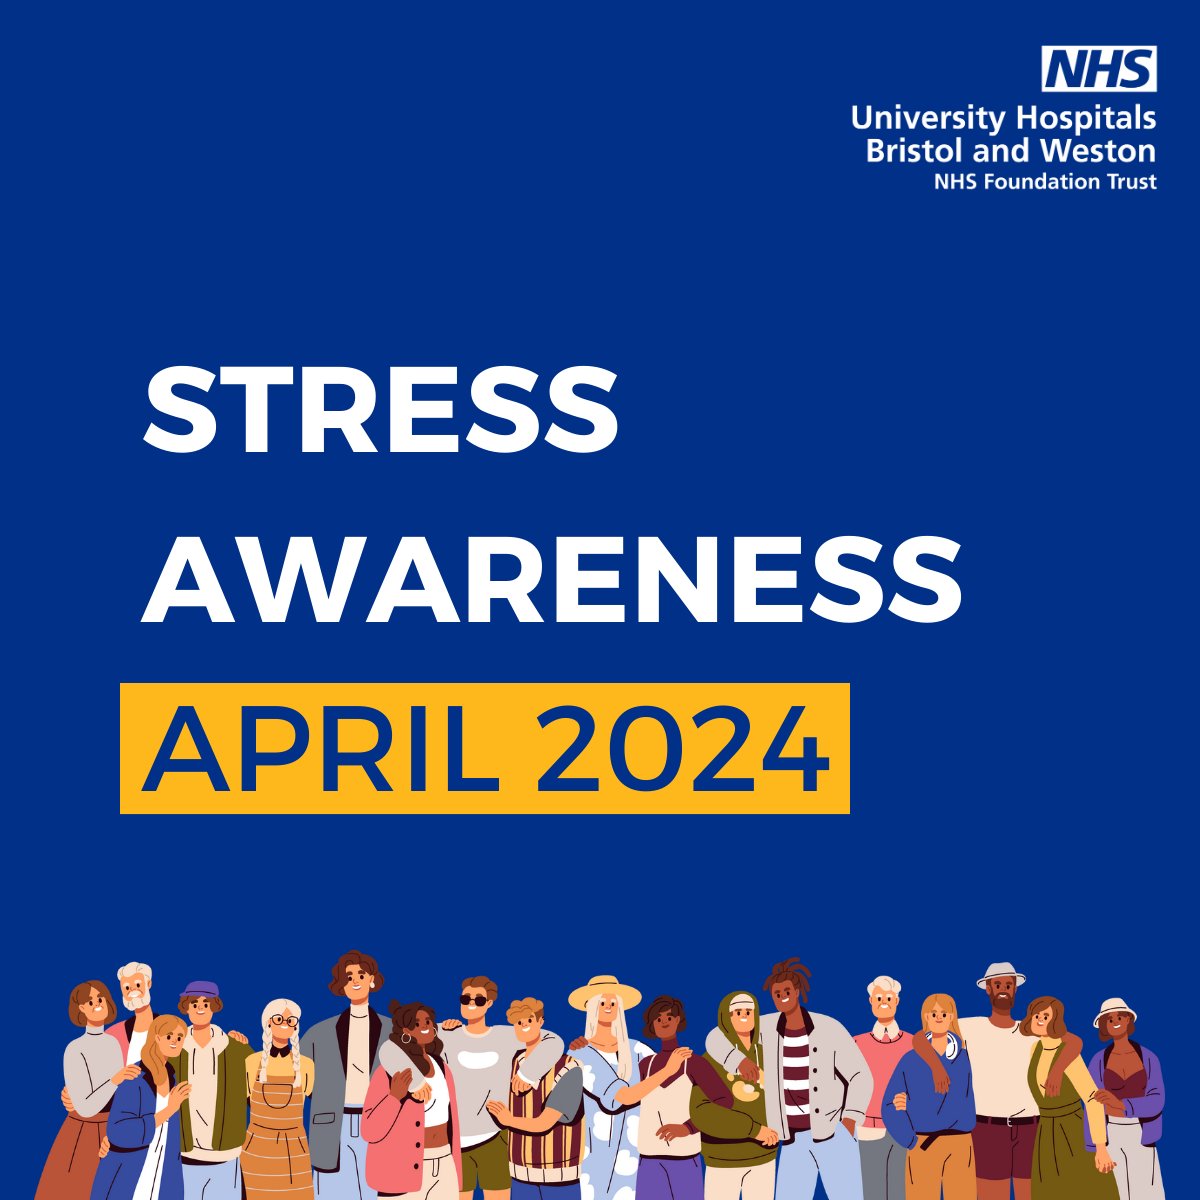 April = Stress Awareness Month 🧠 In support of Stress Awareness Month, we will be highlighting UHBW's Workplace Wellbeing offer. You can find out more about the benefits of working at UHBW here: uhbwcareers.nhs.uk/staff-benefits #TeamUHBW #NHSjobs #StressAwarenessMonth